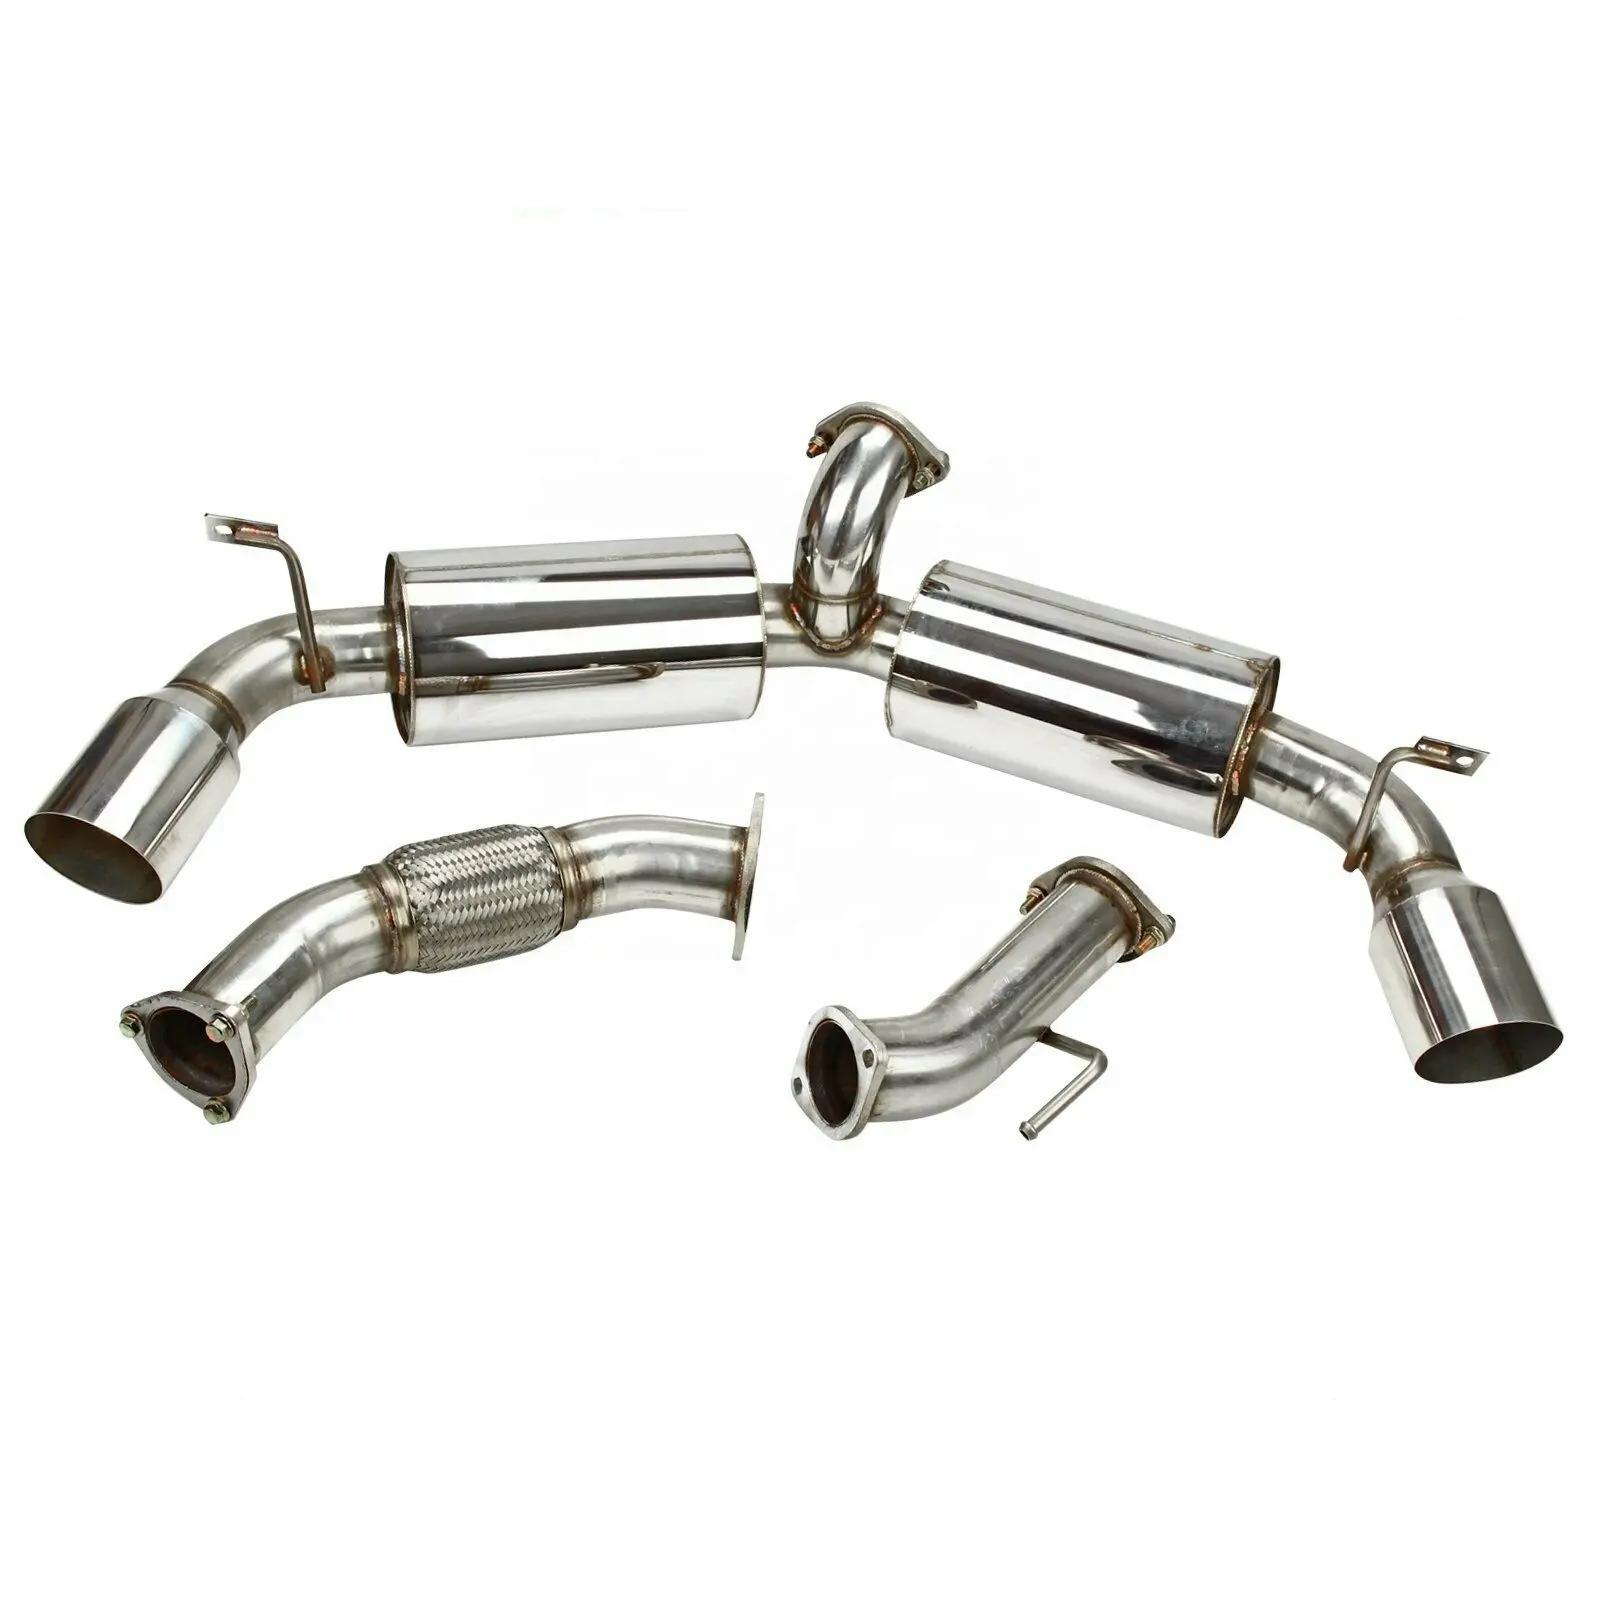 DUAL 4.5"TIP STAINLESS STEEL RACING CATBACK MUFFLER EXHAUST SYSTEM FOR W20 MR-2 SW20